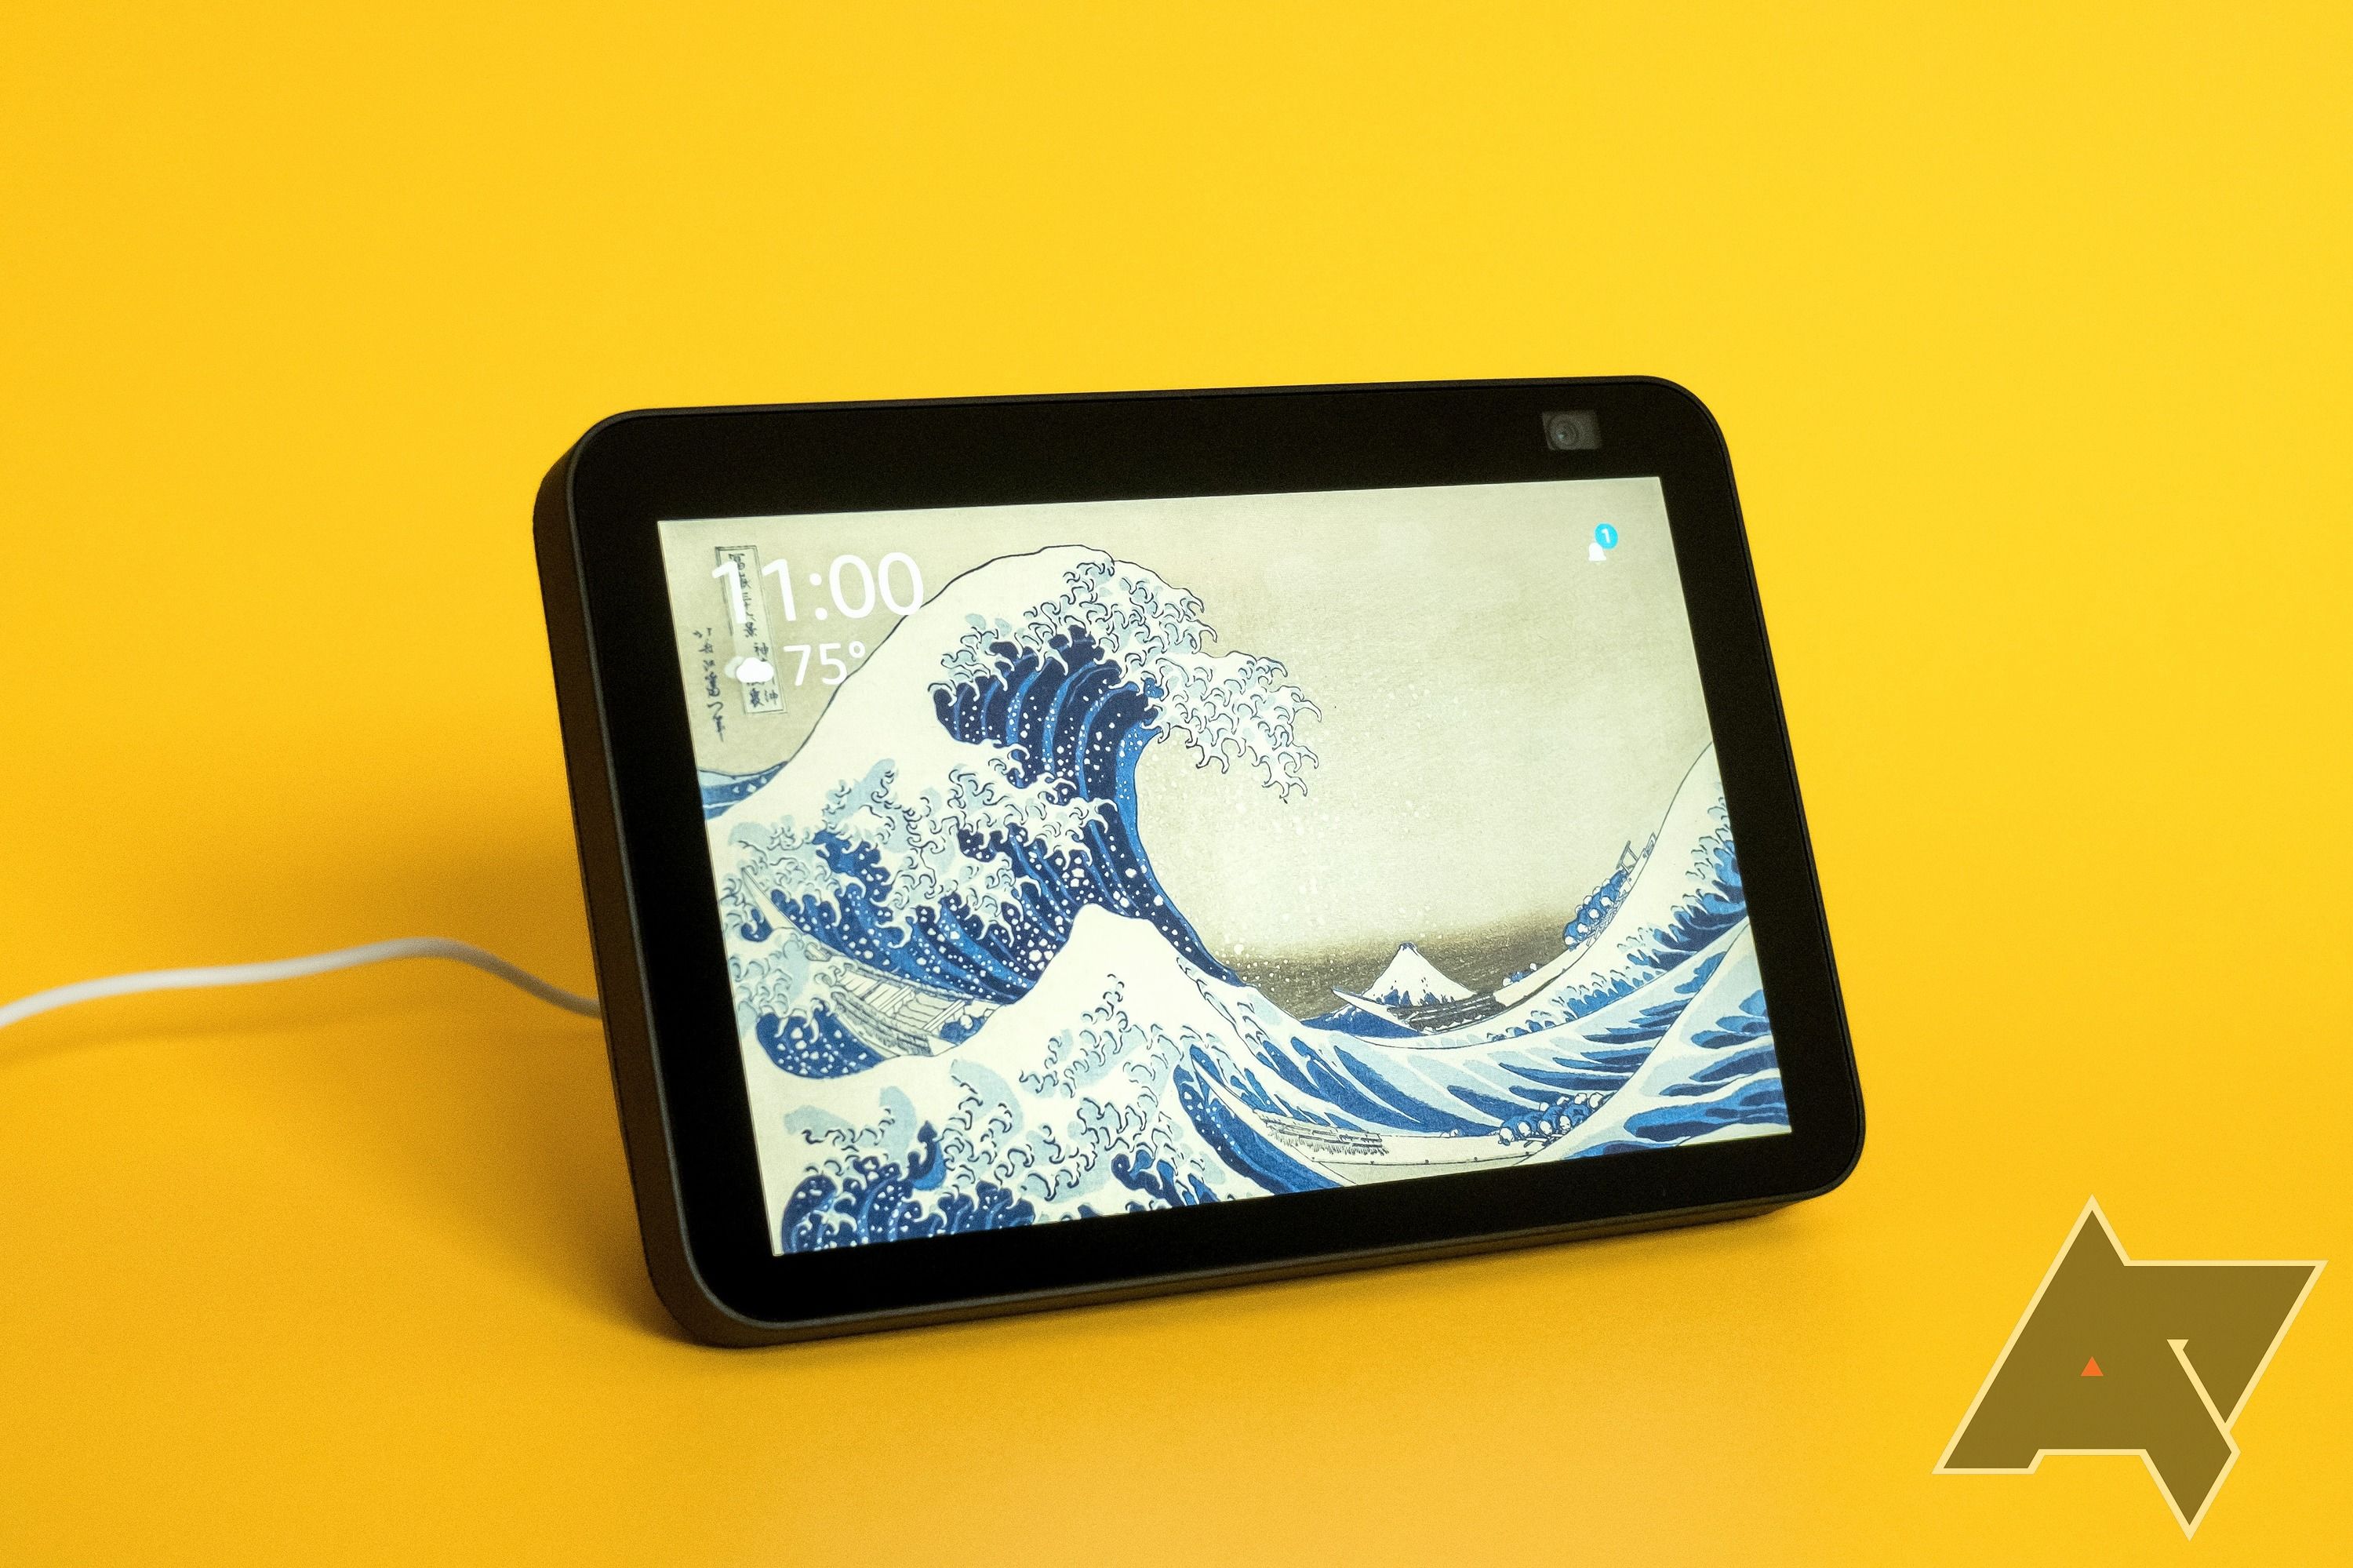 How Do You Watch TV On Echo Show & What Video Apps Are Available?